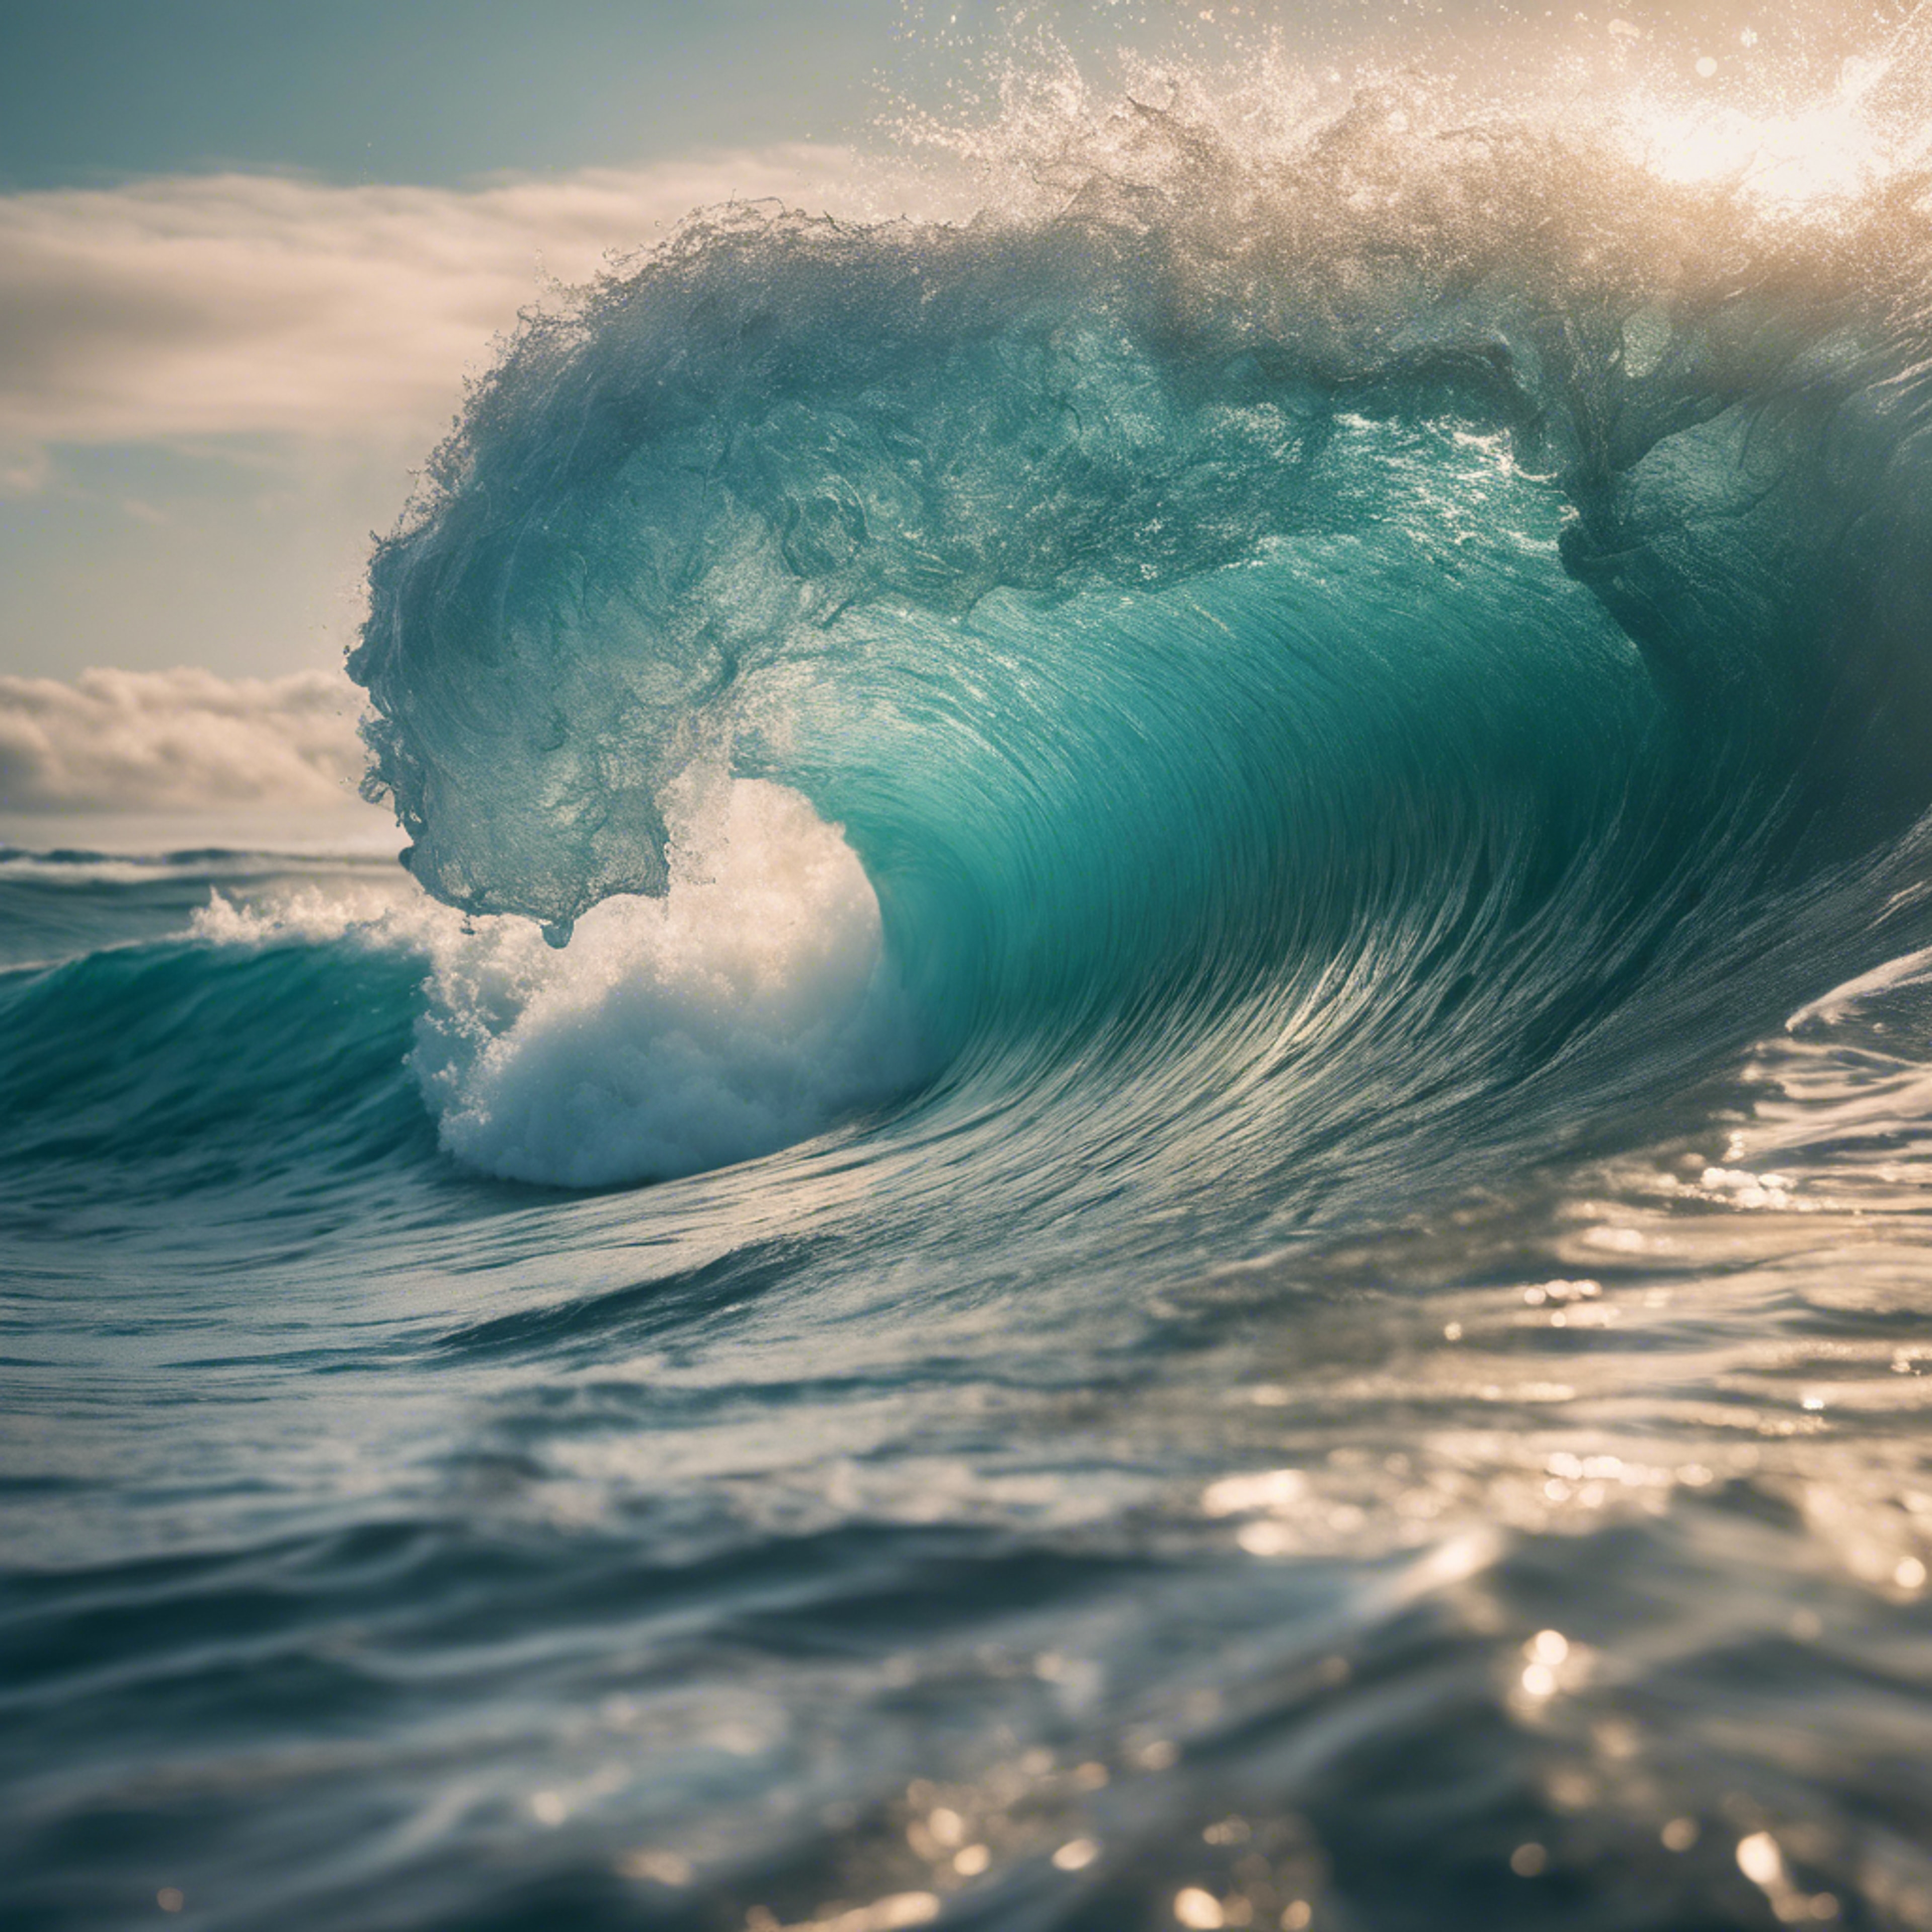 A powerful ocean wave about to crash, casting a cool teal hue. Ფონი[600fa377246440af9acb]